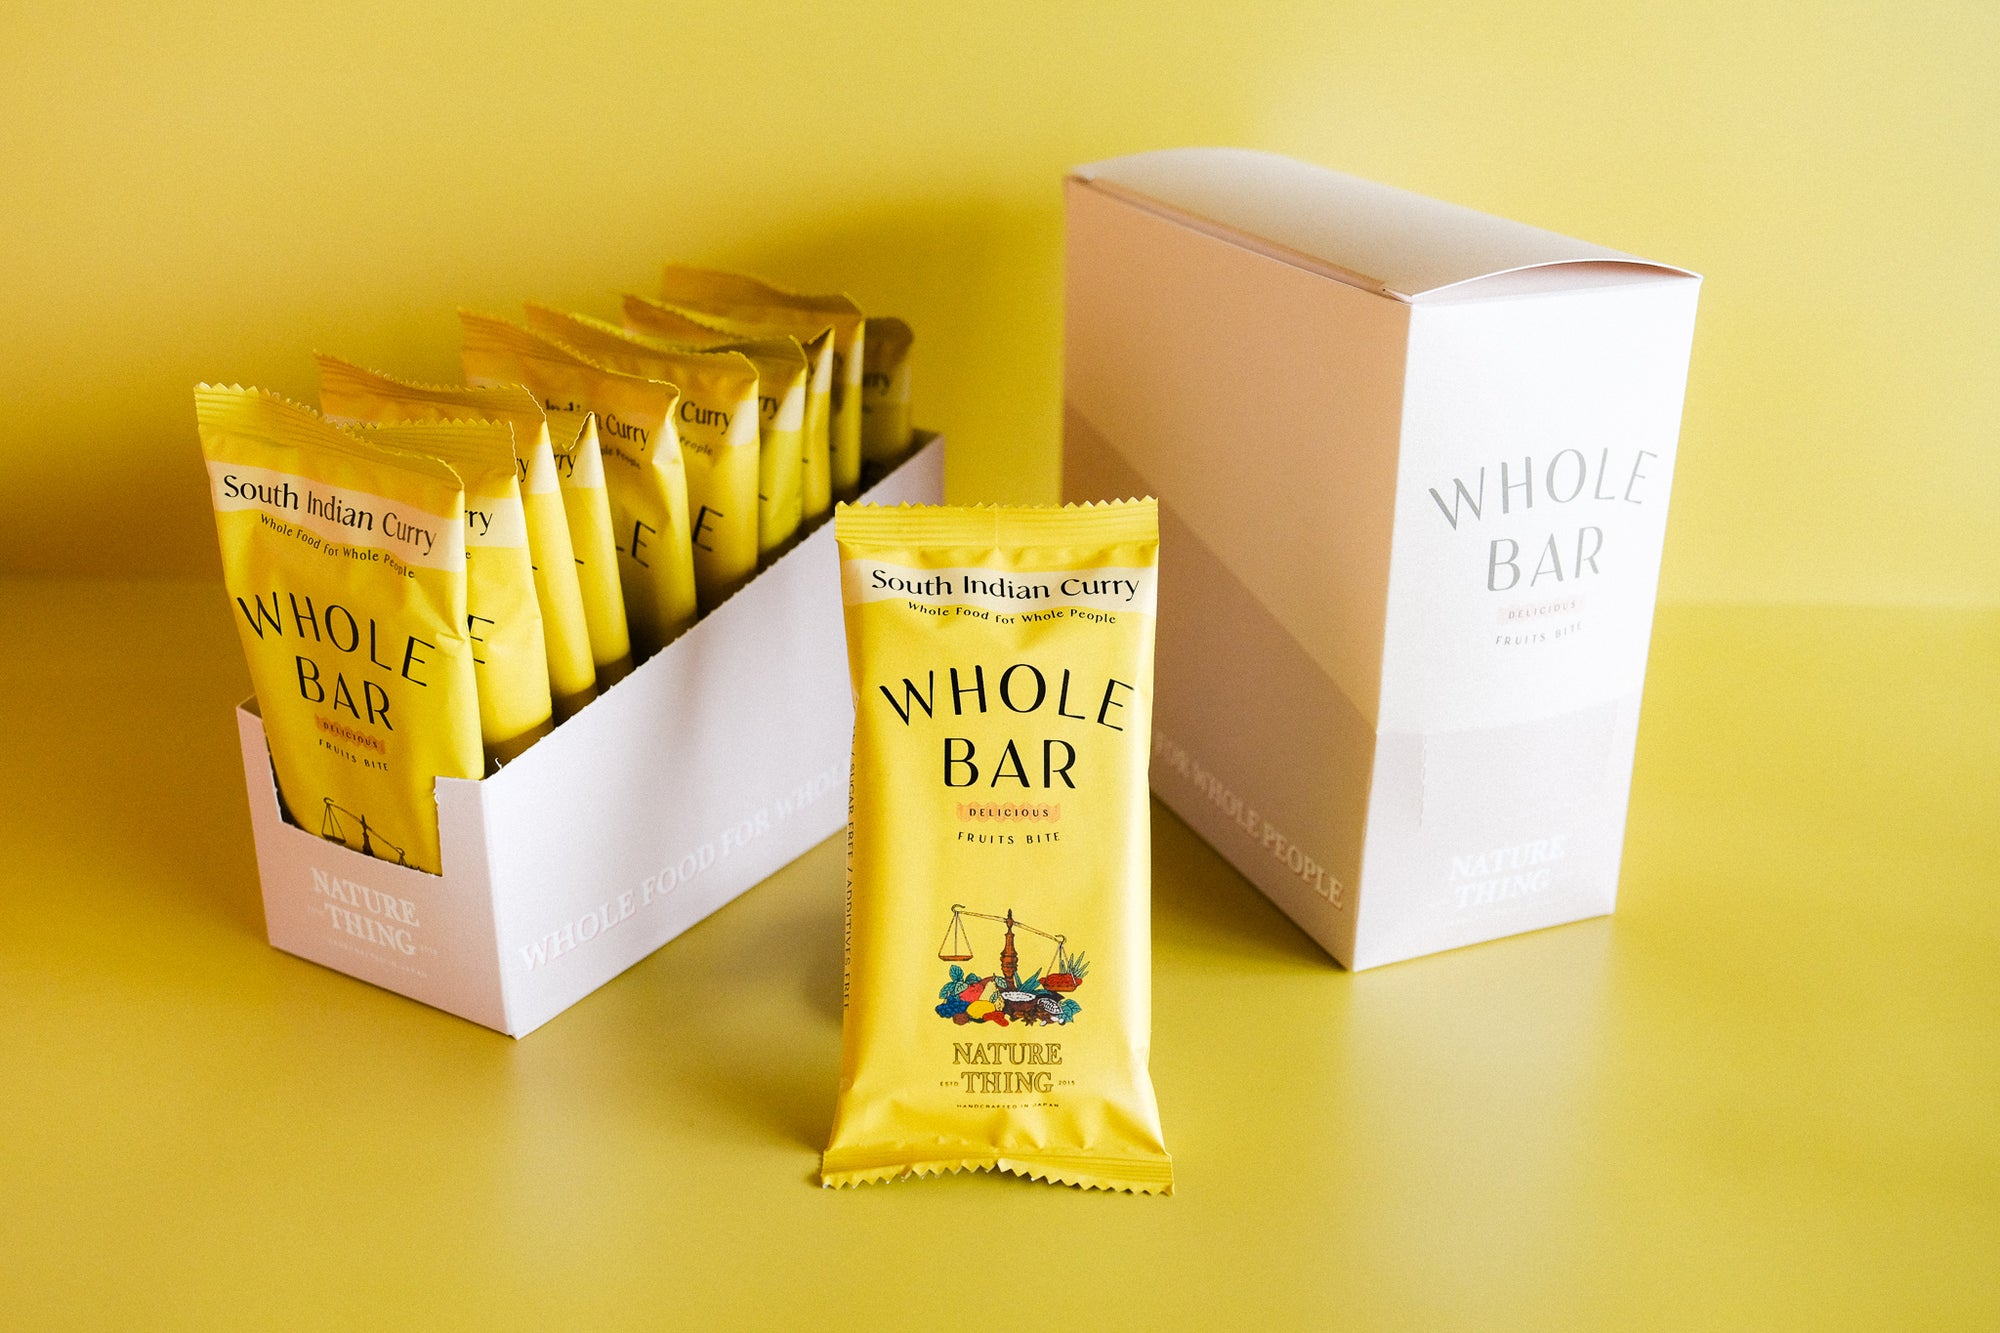 WHOLE BAR / South Indian Curry 12個入BOX